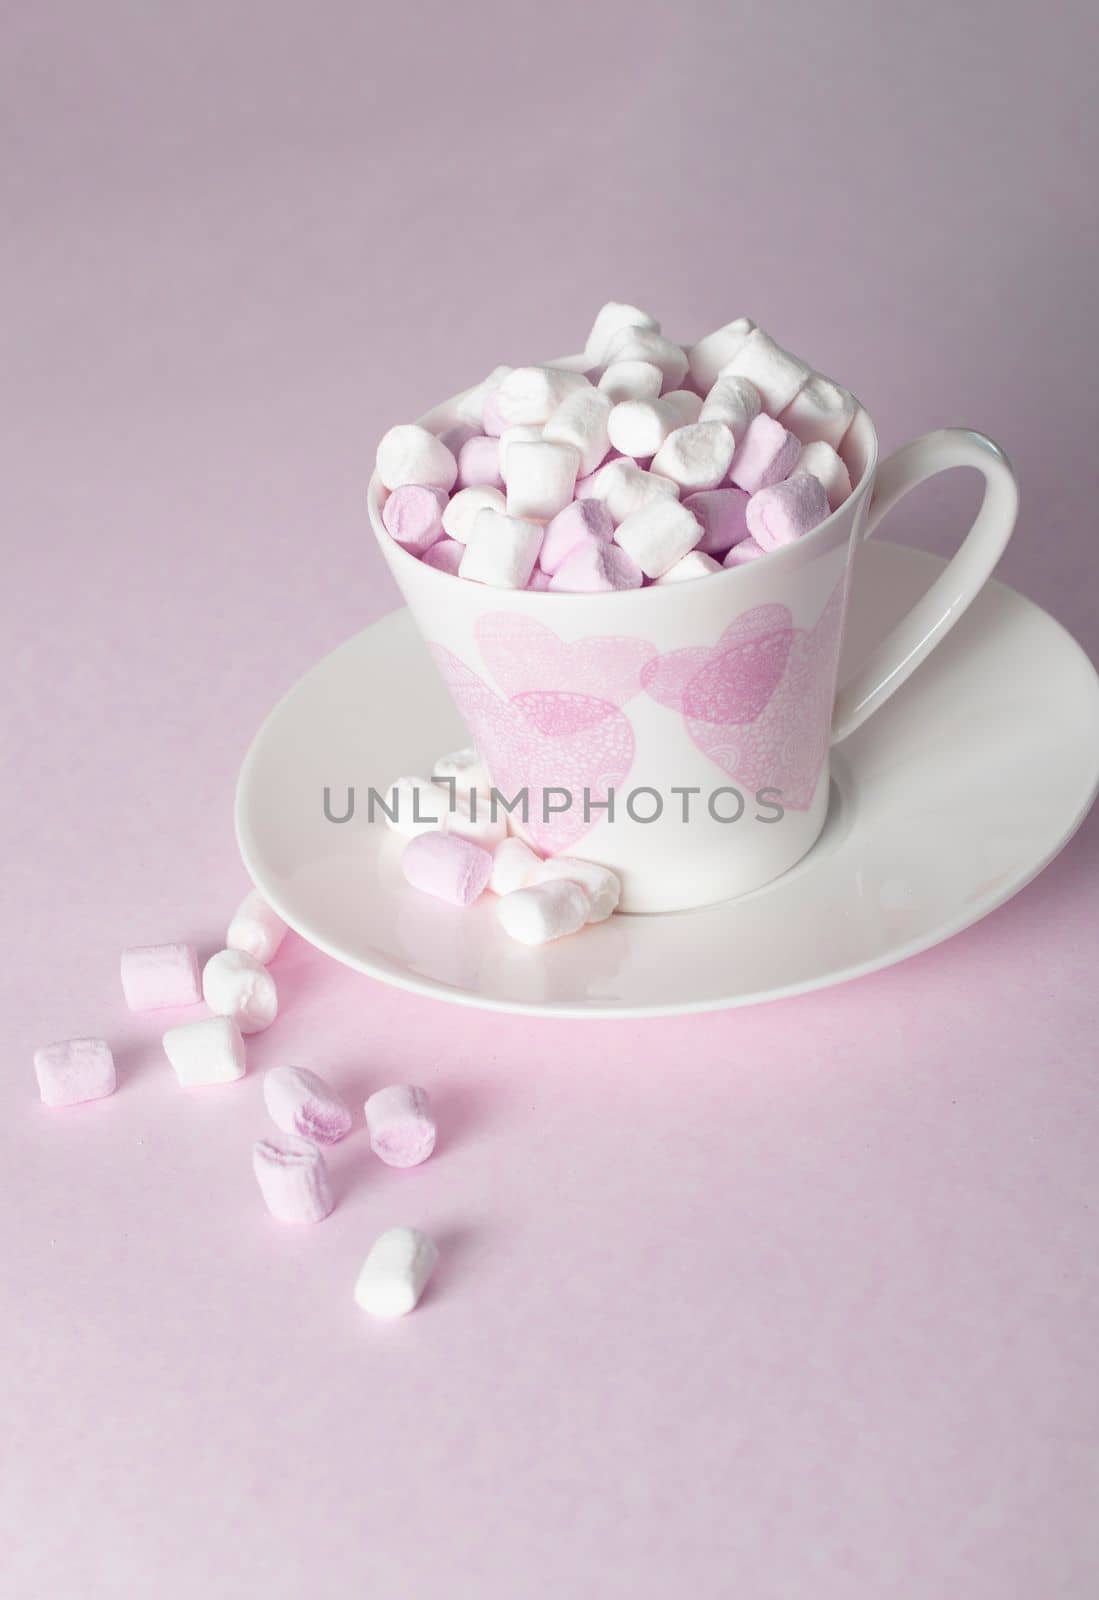 light pink and white marshmallows in a beautiful ceramic cups with pink hearts, Concept Mother's Day gift, Valentine's Day. High quality photo